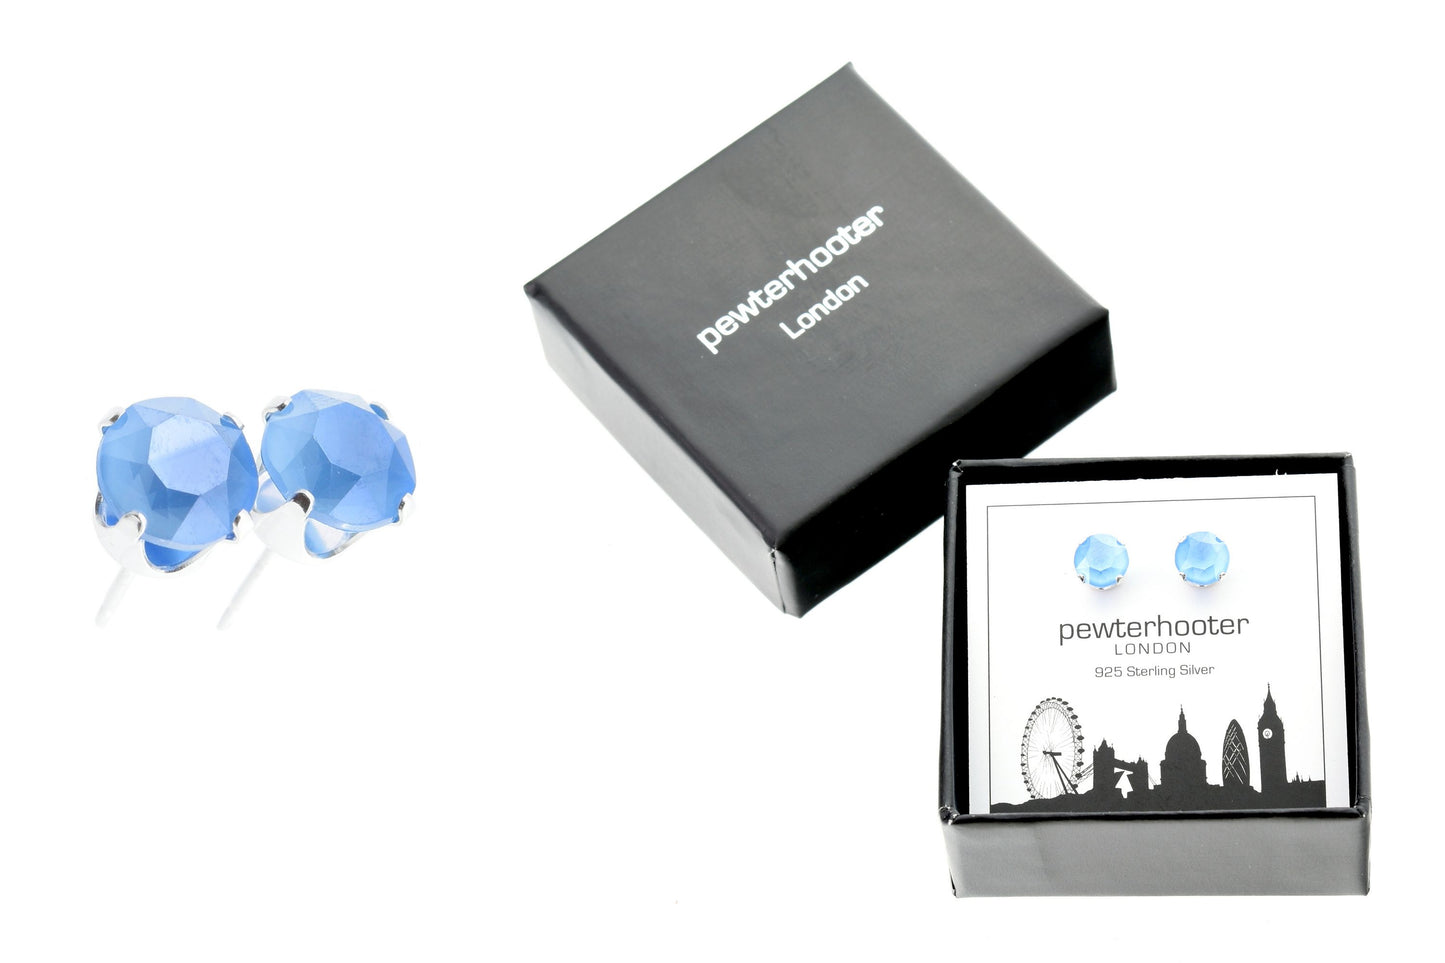 pewterhooter® Women's Classic Collection 925 Sterling silver earrings with sparkling Summer Blue crystals, packaged in a gift box for any occasion.